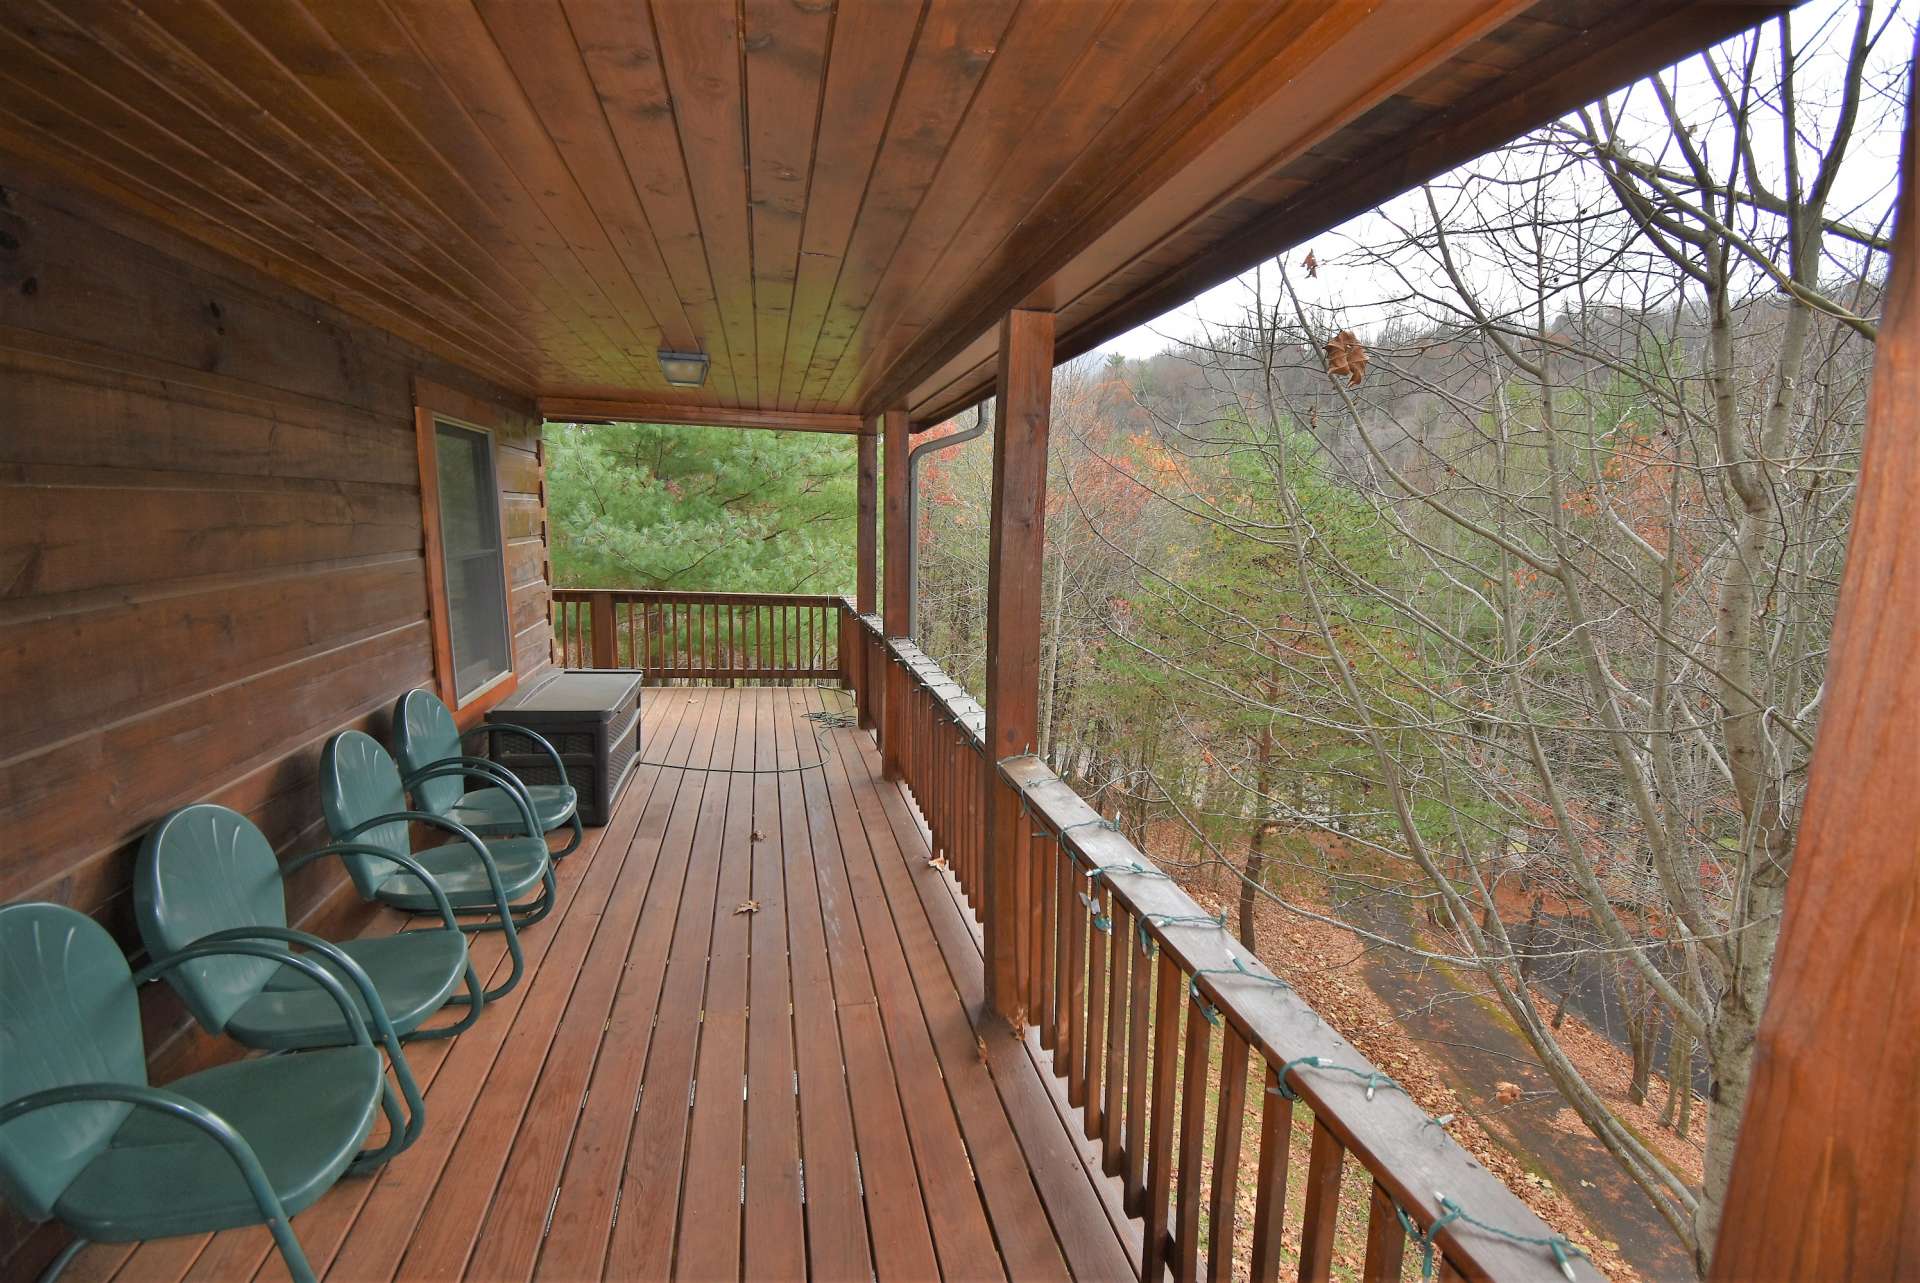 Relax on the covered deck and listen to the sounds of the river below.